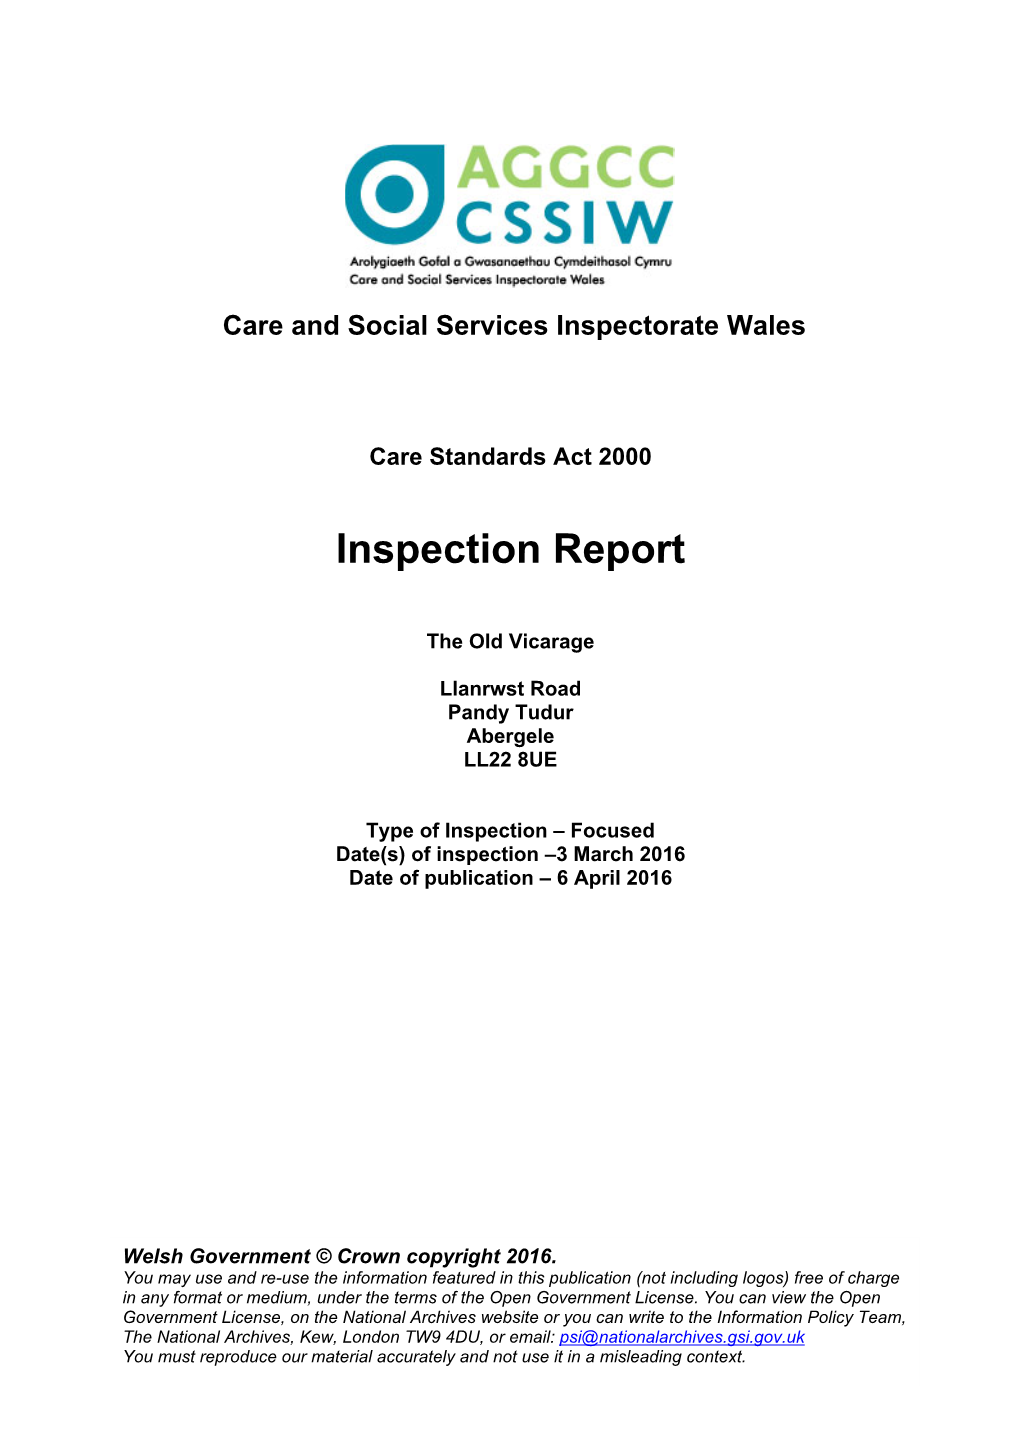 Care and Social Services Inspectorate Wales